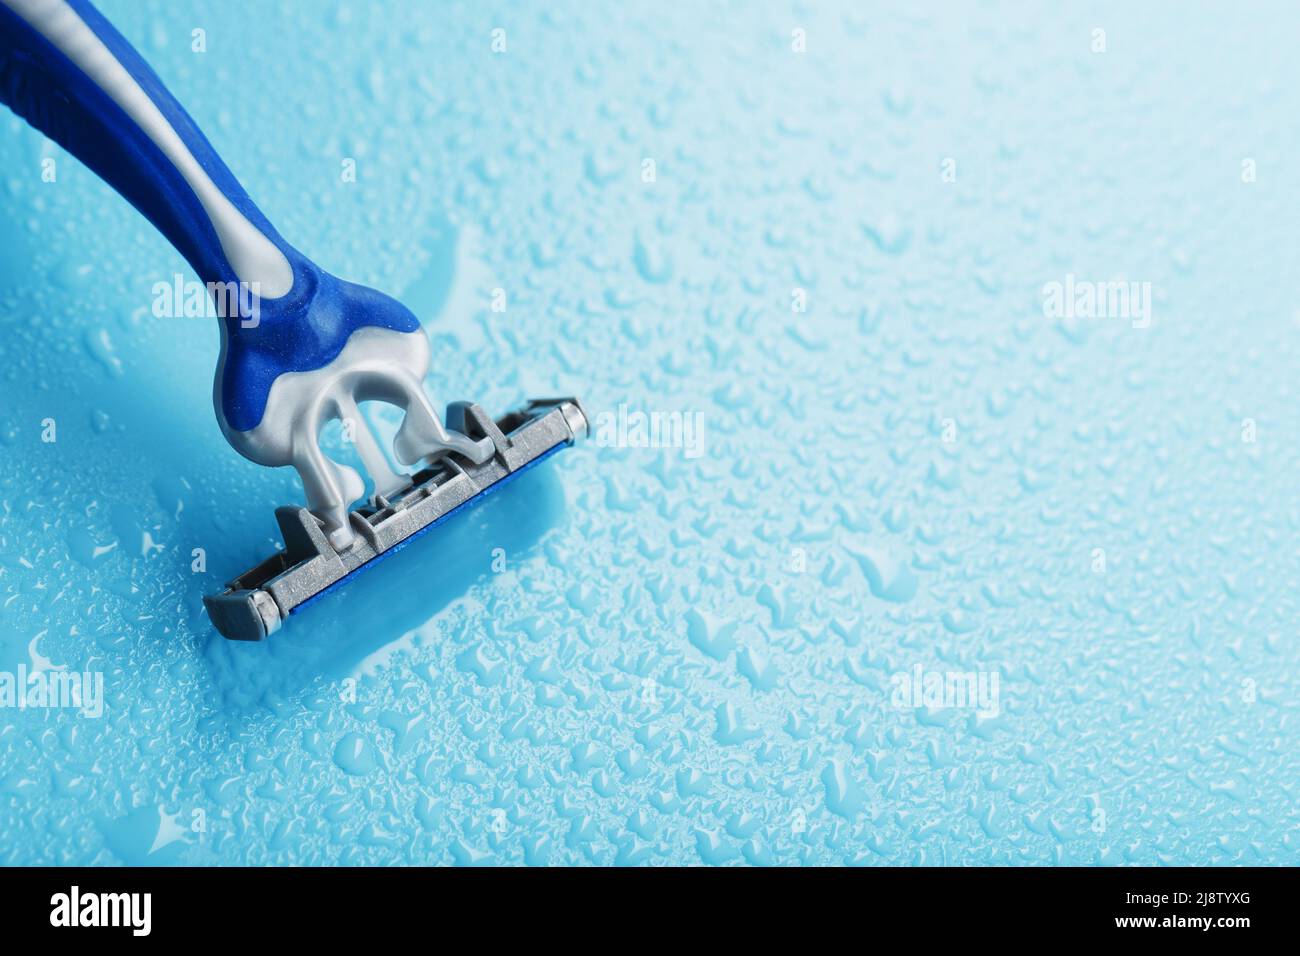 Shaving machine with three blades on a blue background with water drops in close-up. The concept of purity and freshness Stock Photo